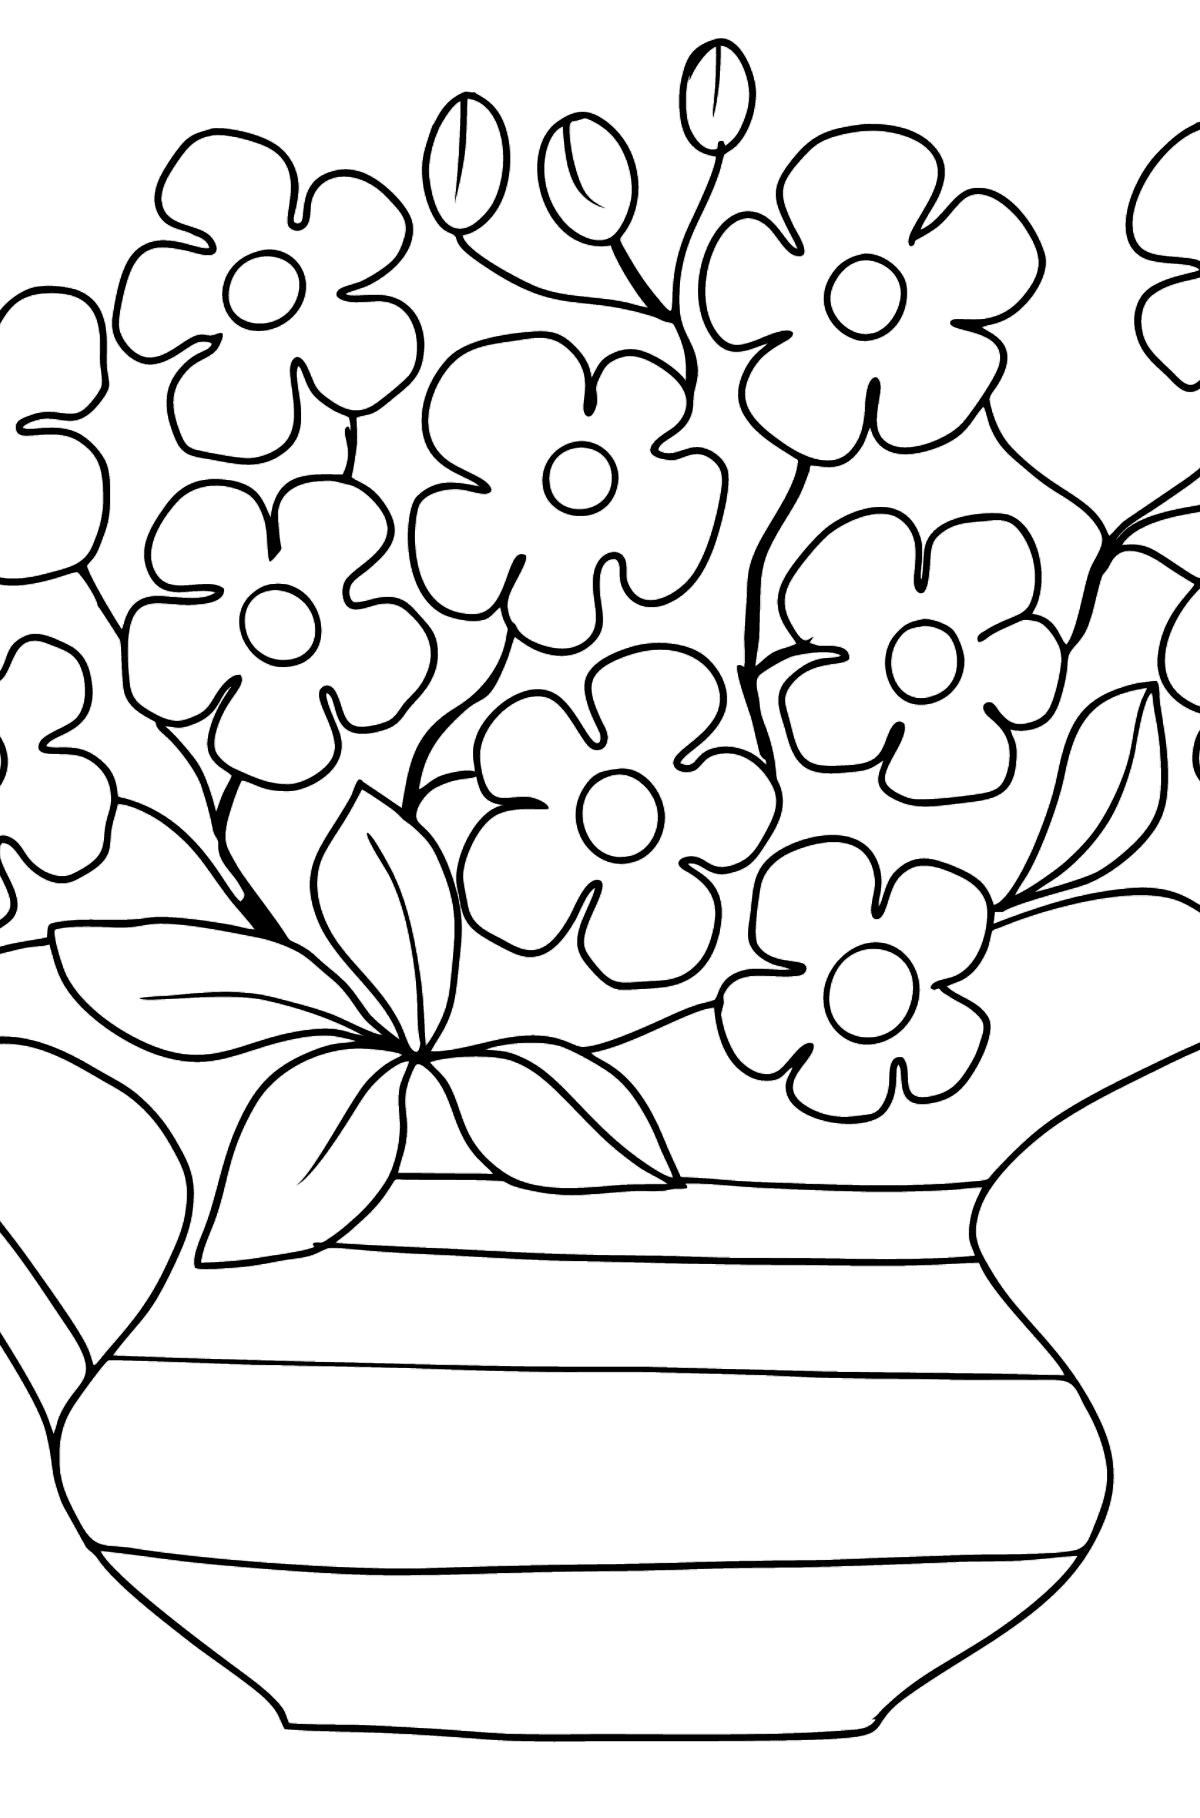 Flower Coloring Page - Forget me nots - Coloring Pages for Kids